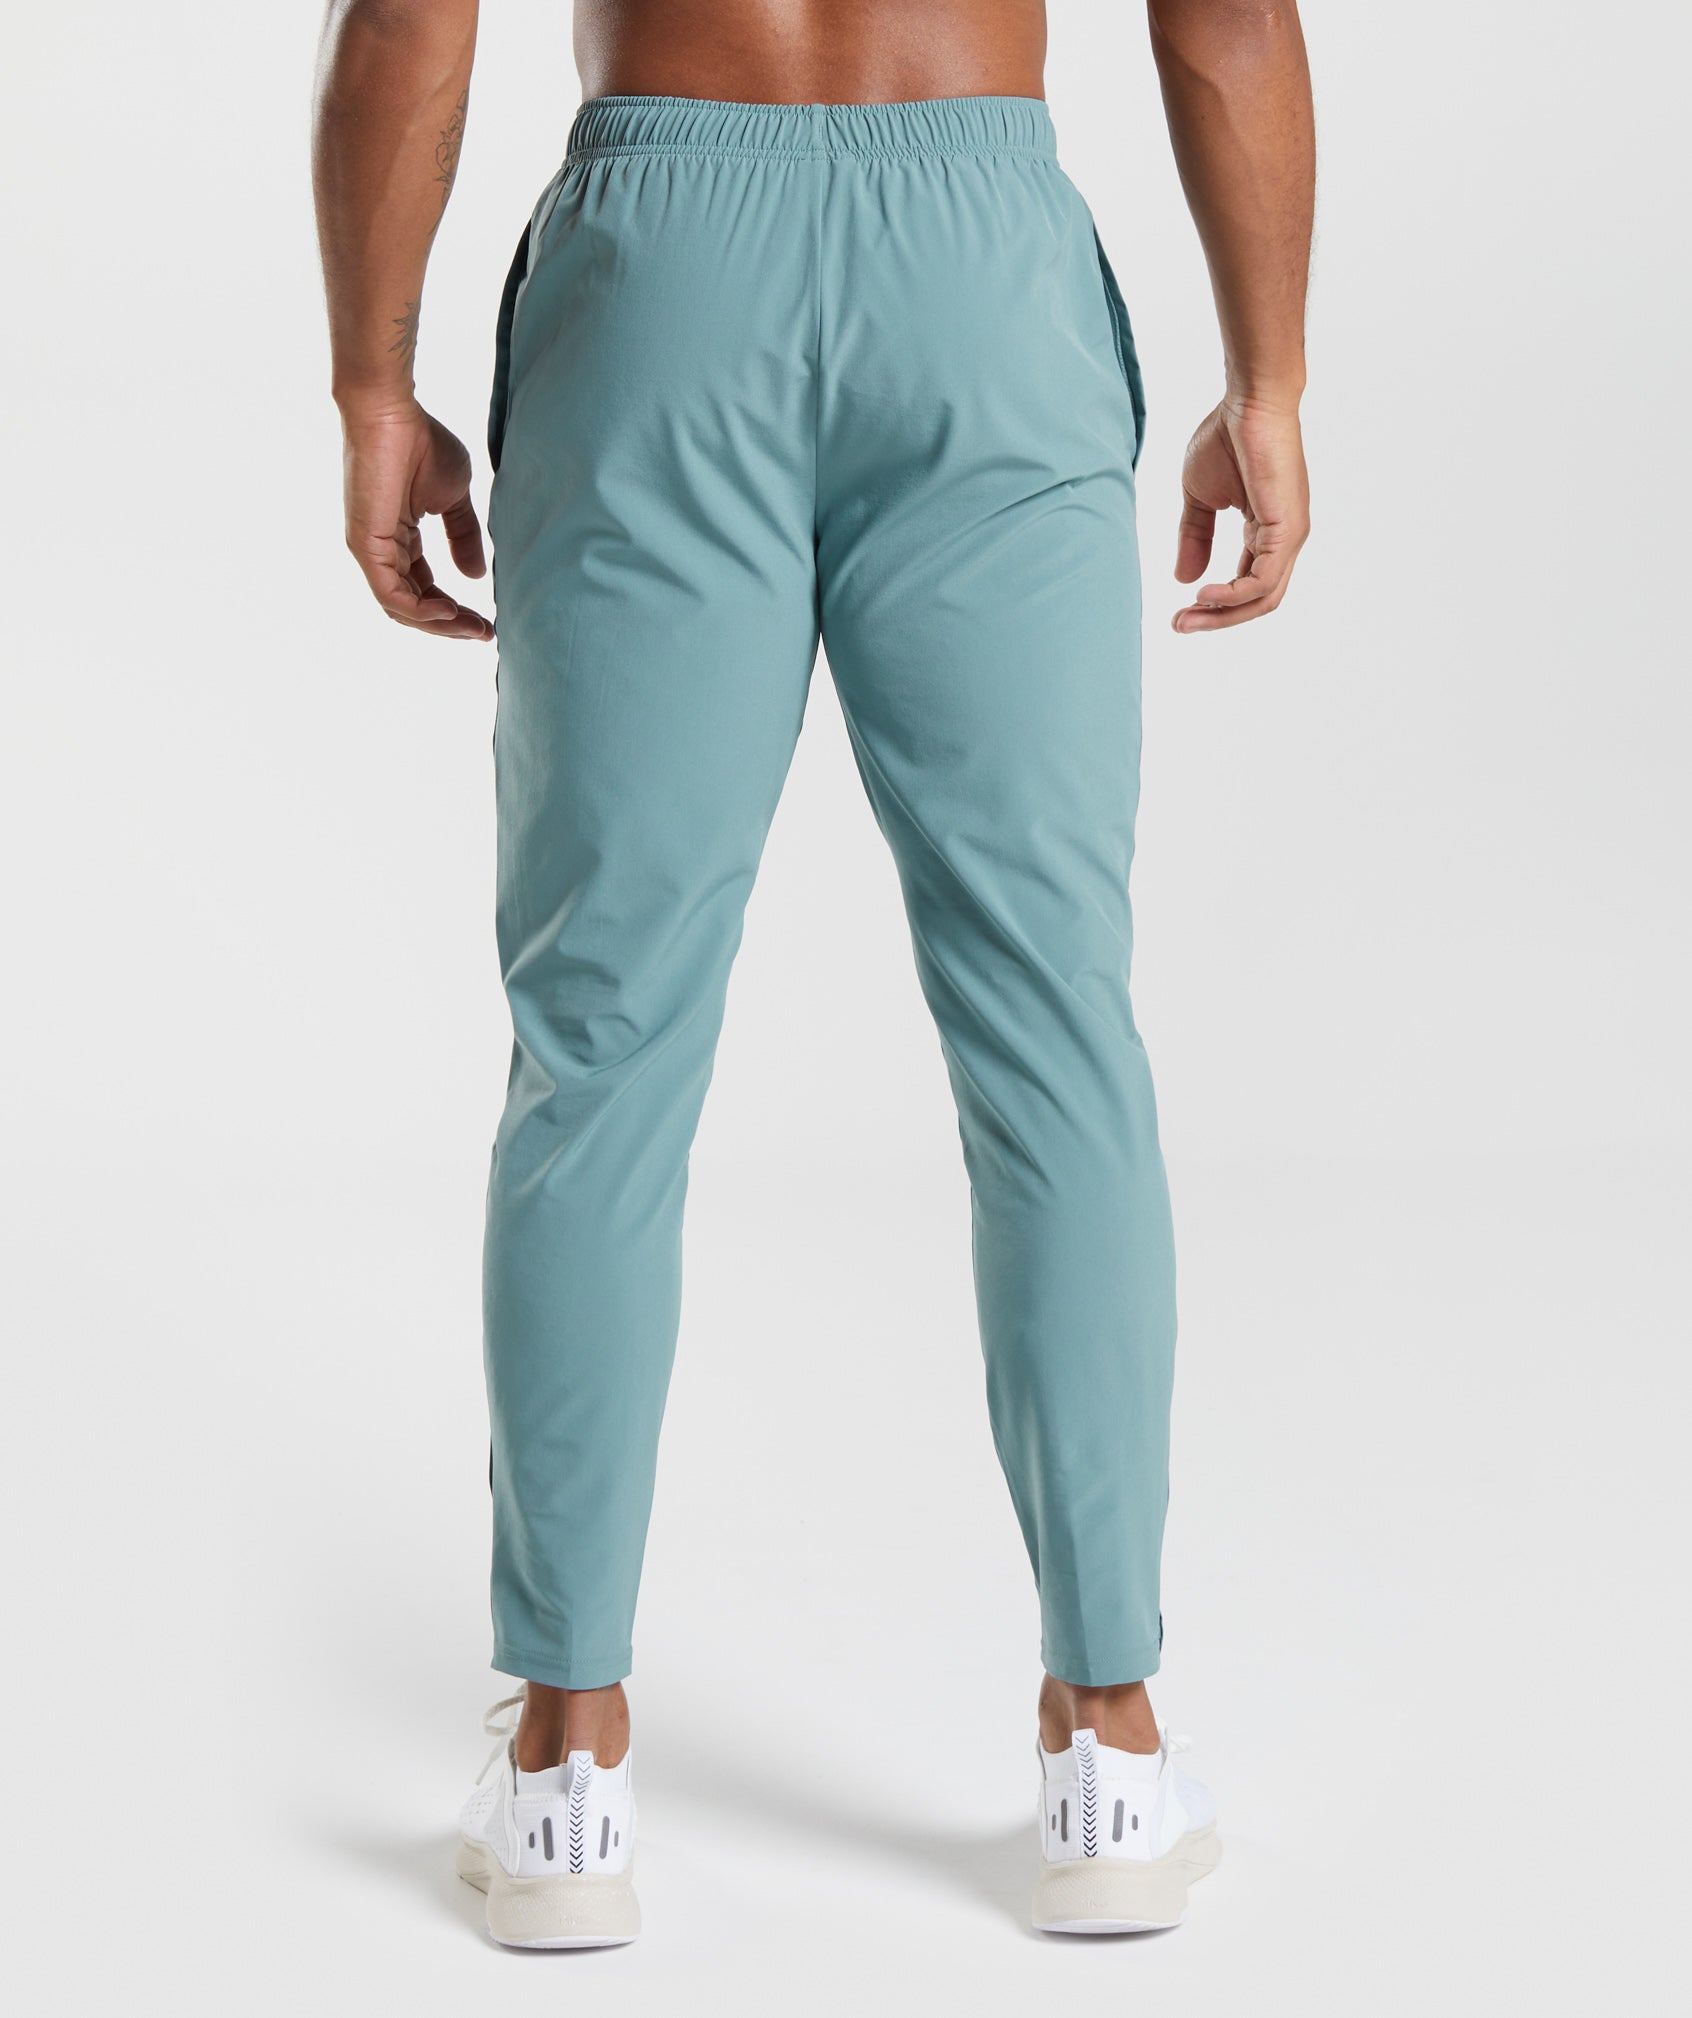 Arrival Joggers in Thunder Blue